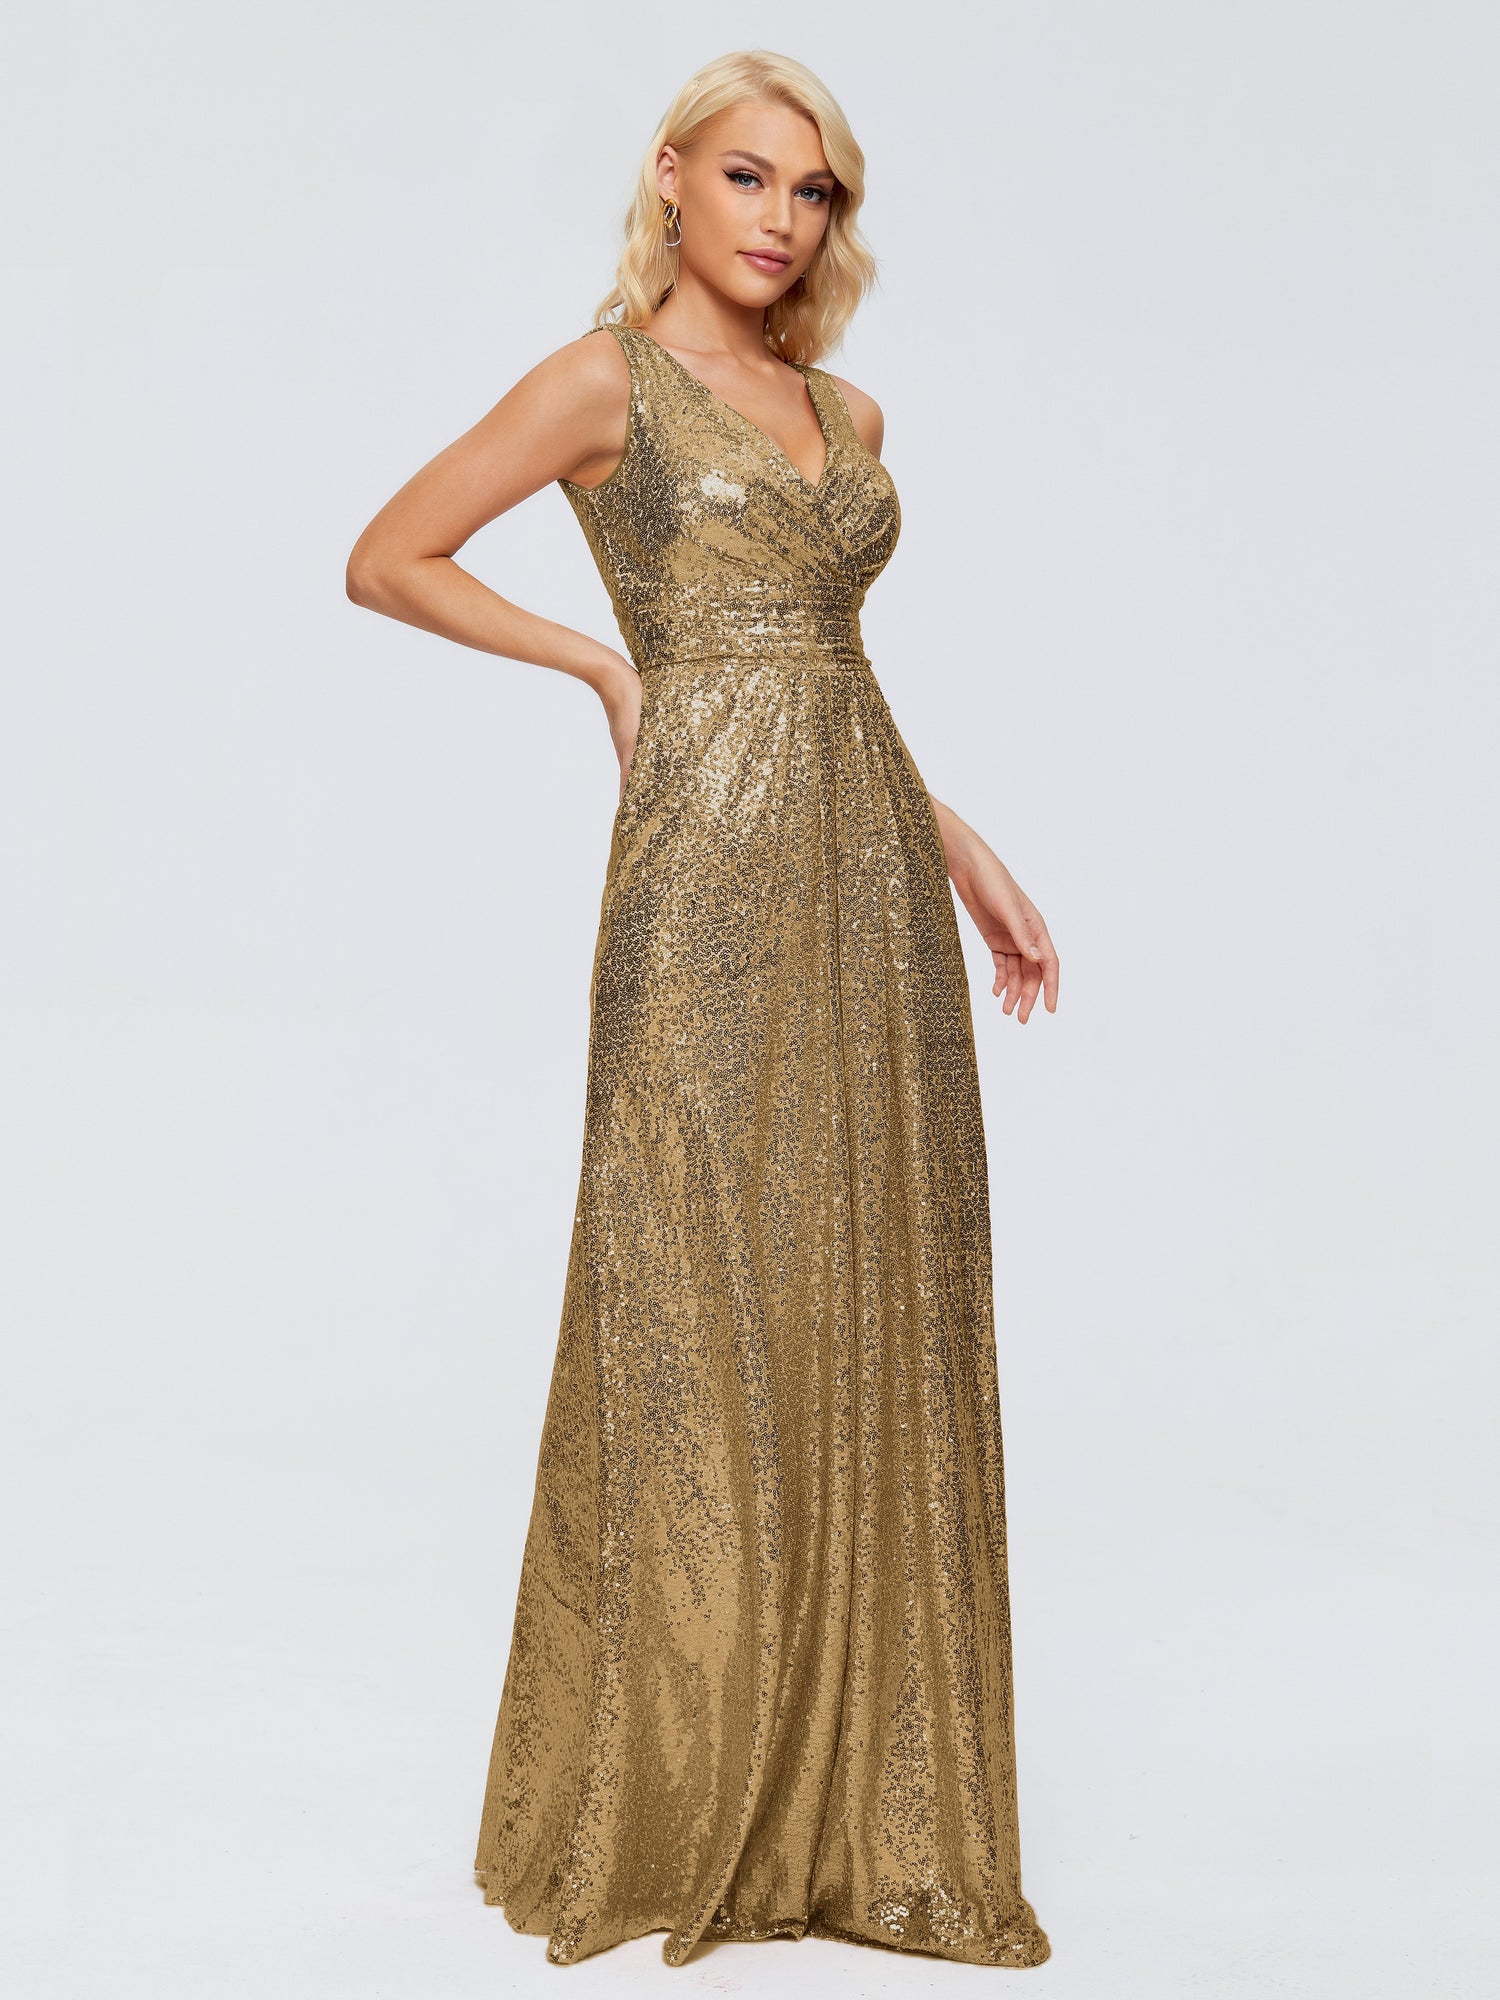 15 Sequin Bridesmaid Dresses That You'll Like Wedding Dresses Guide